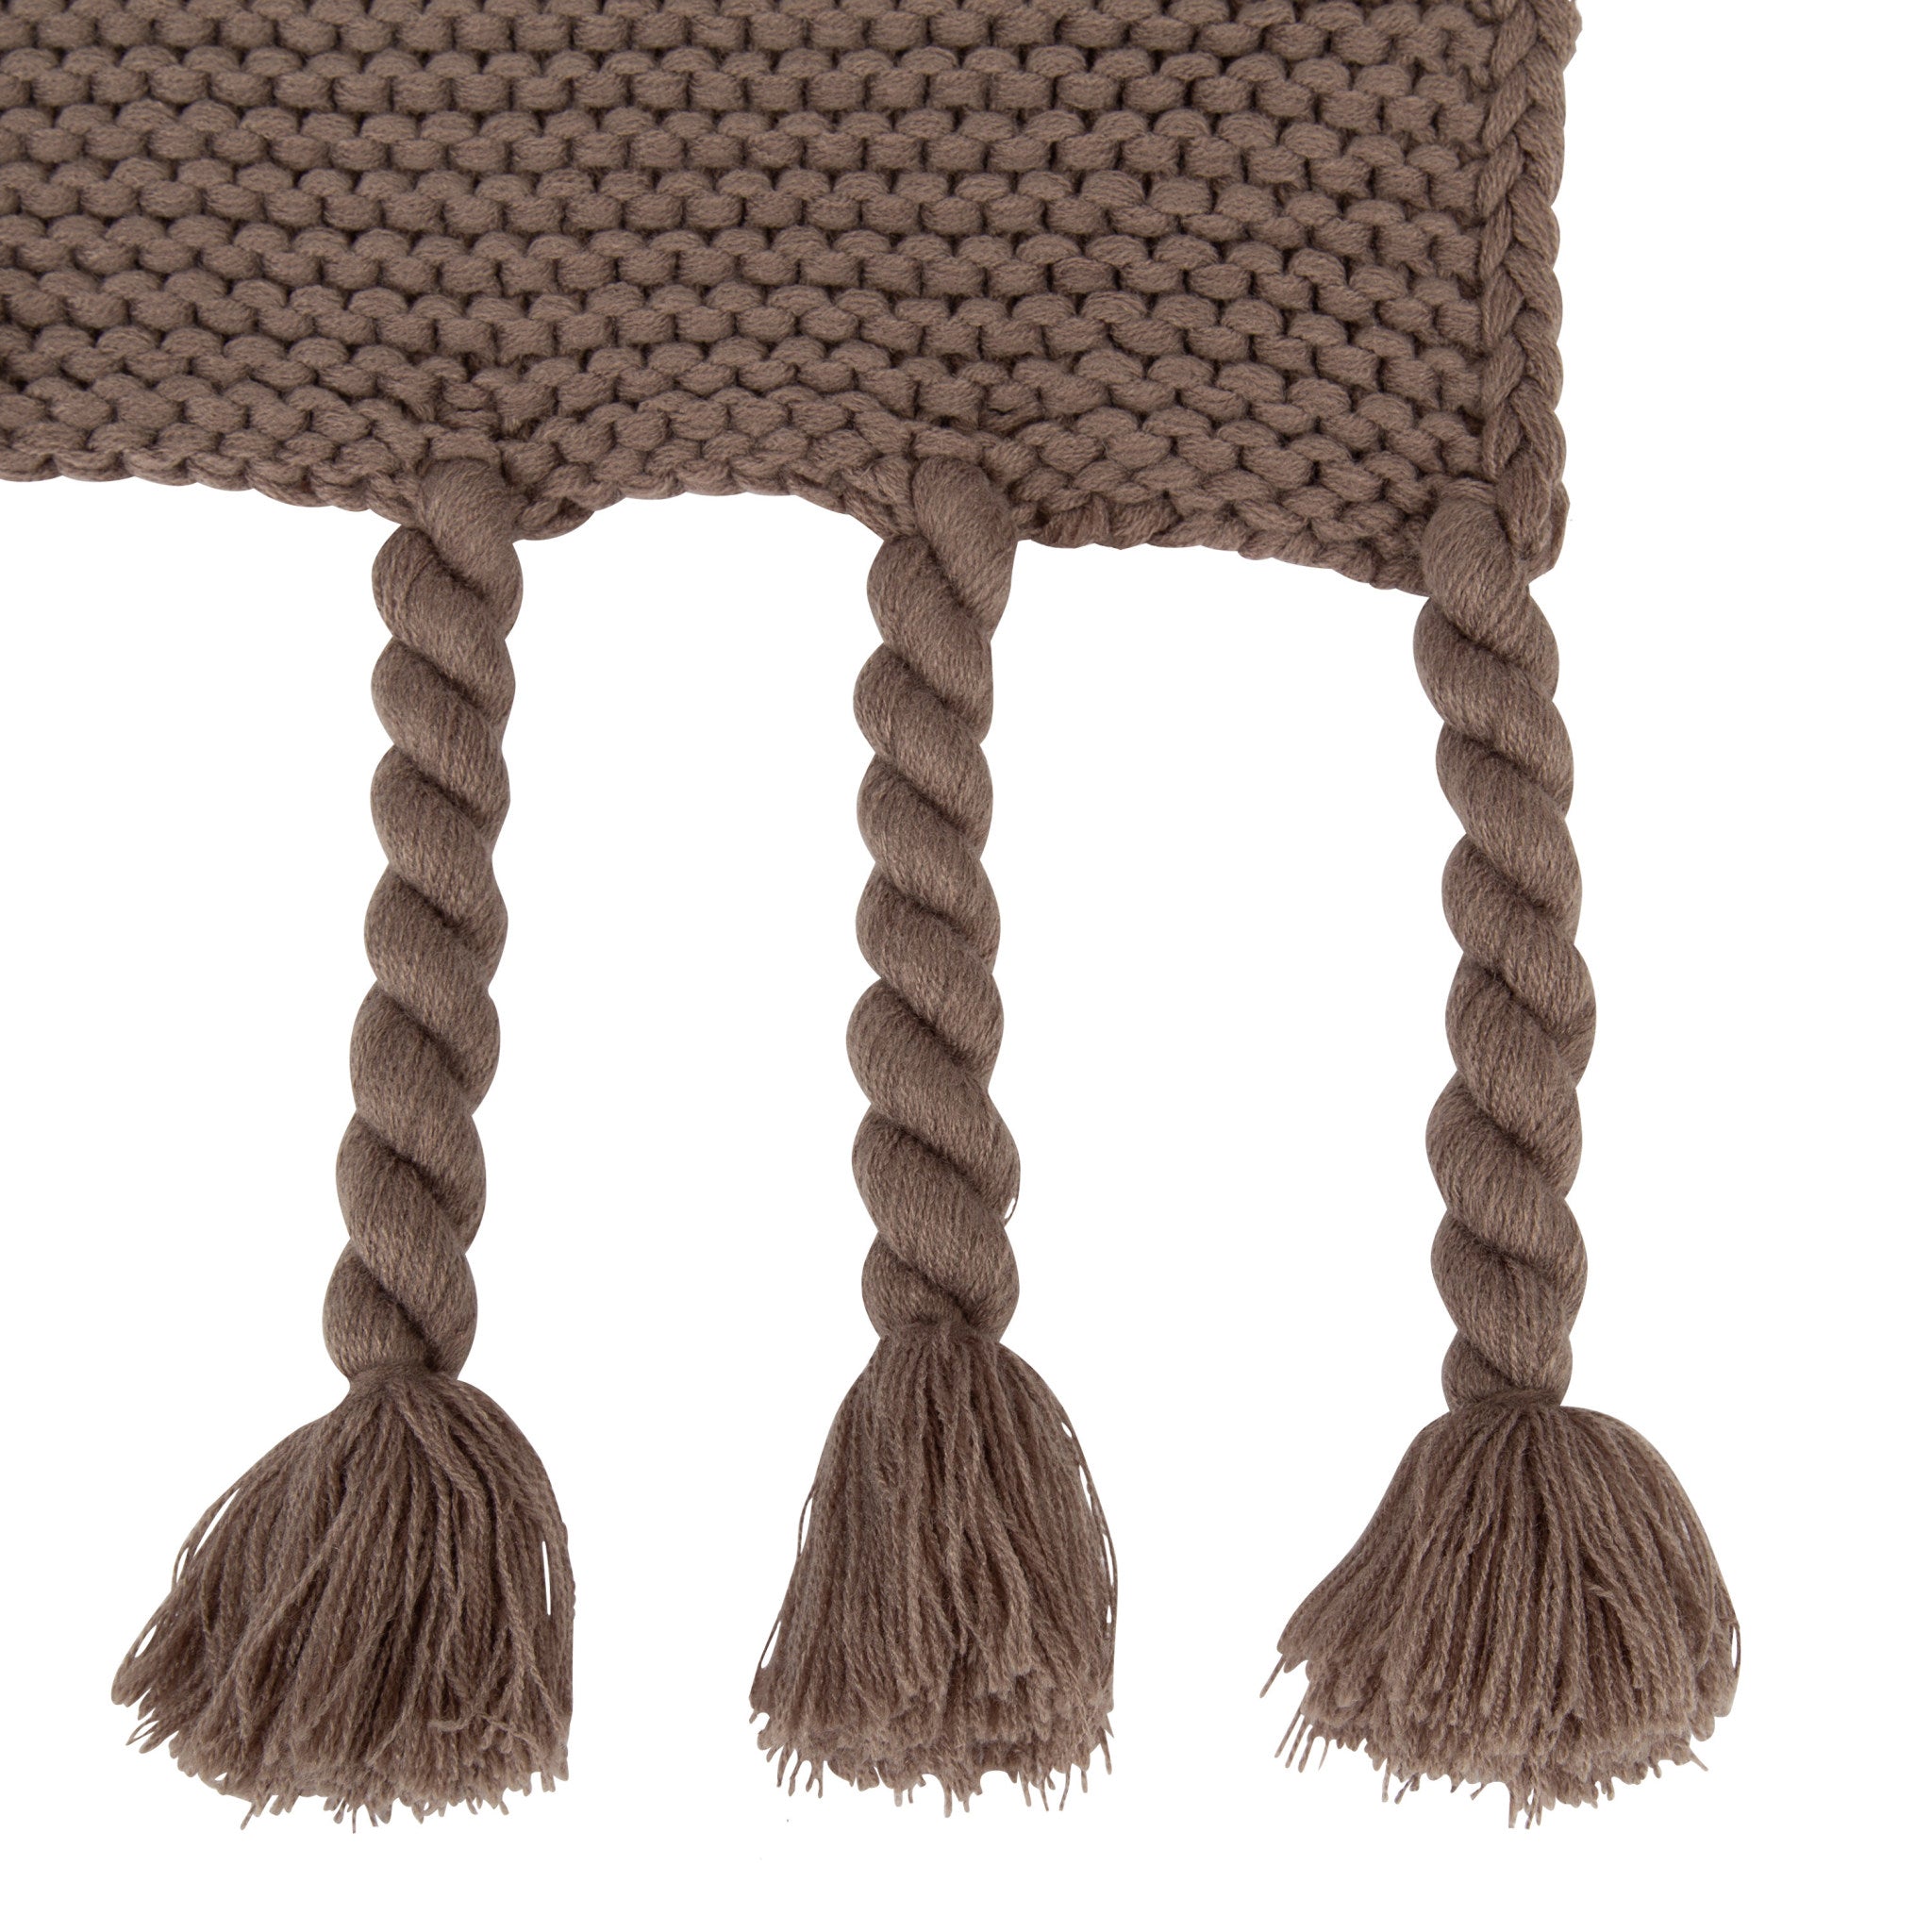 Foley Throw Blanket with Rope Tassels